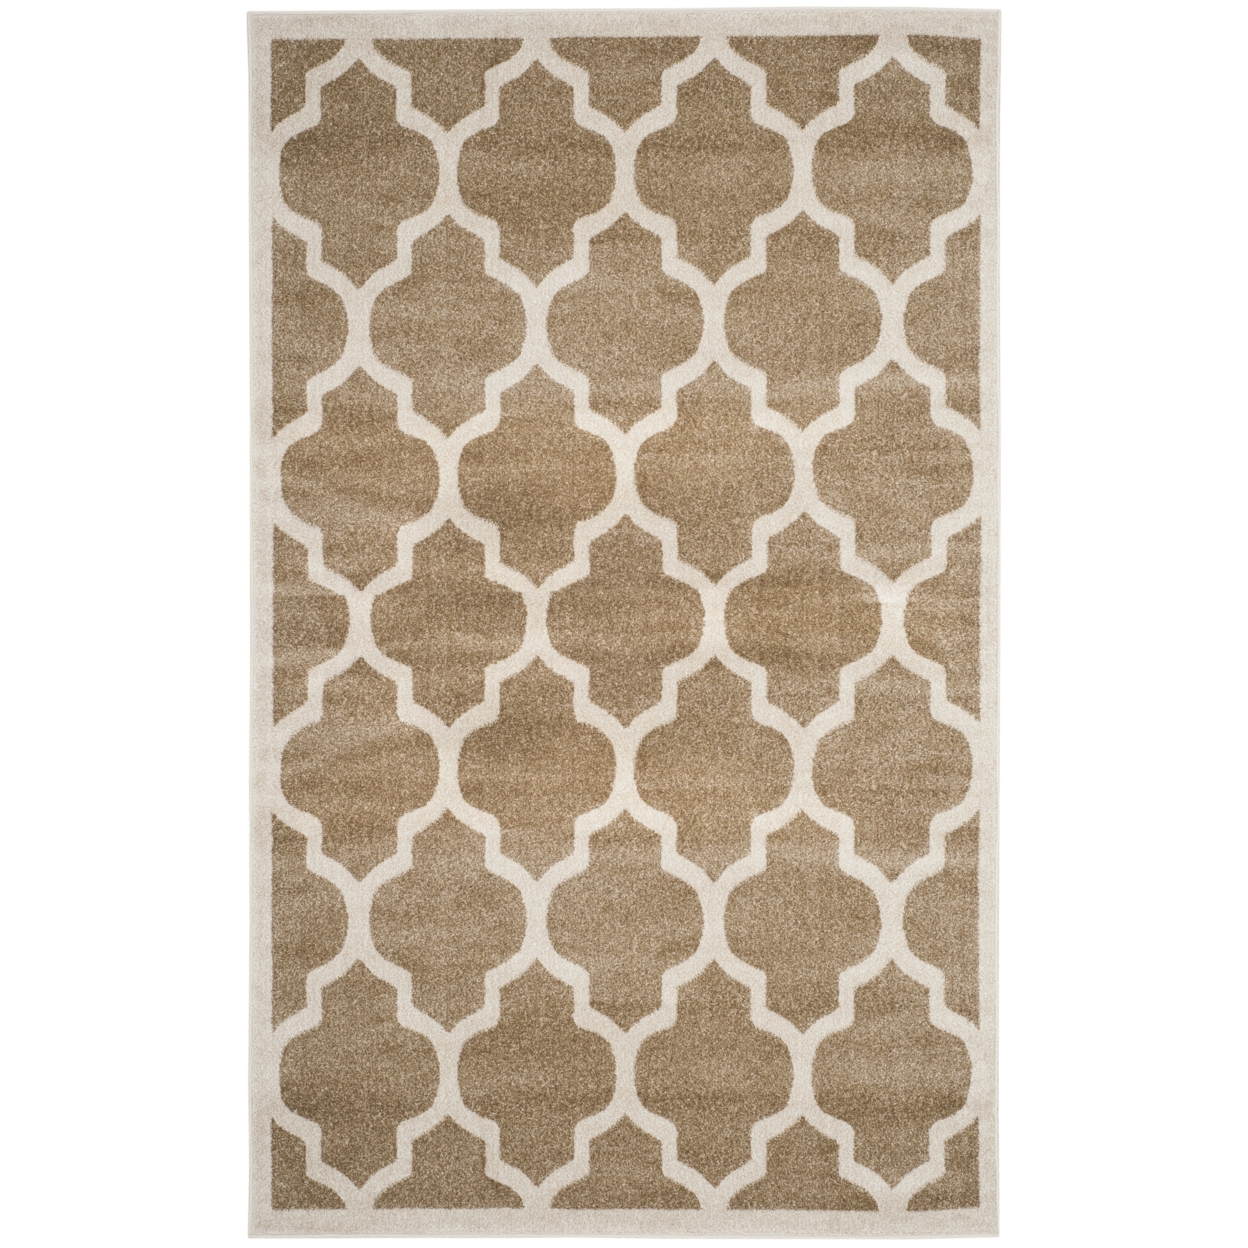 SAFAVIEH Amherst Collection AMTW420S Wheat / Beige Rug - 7' Square